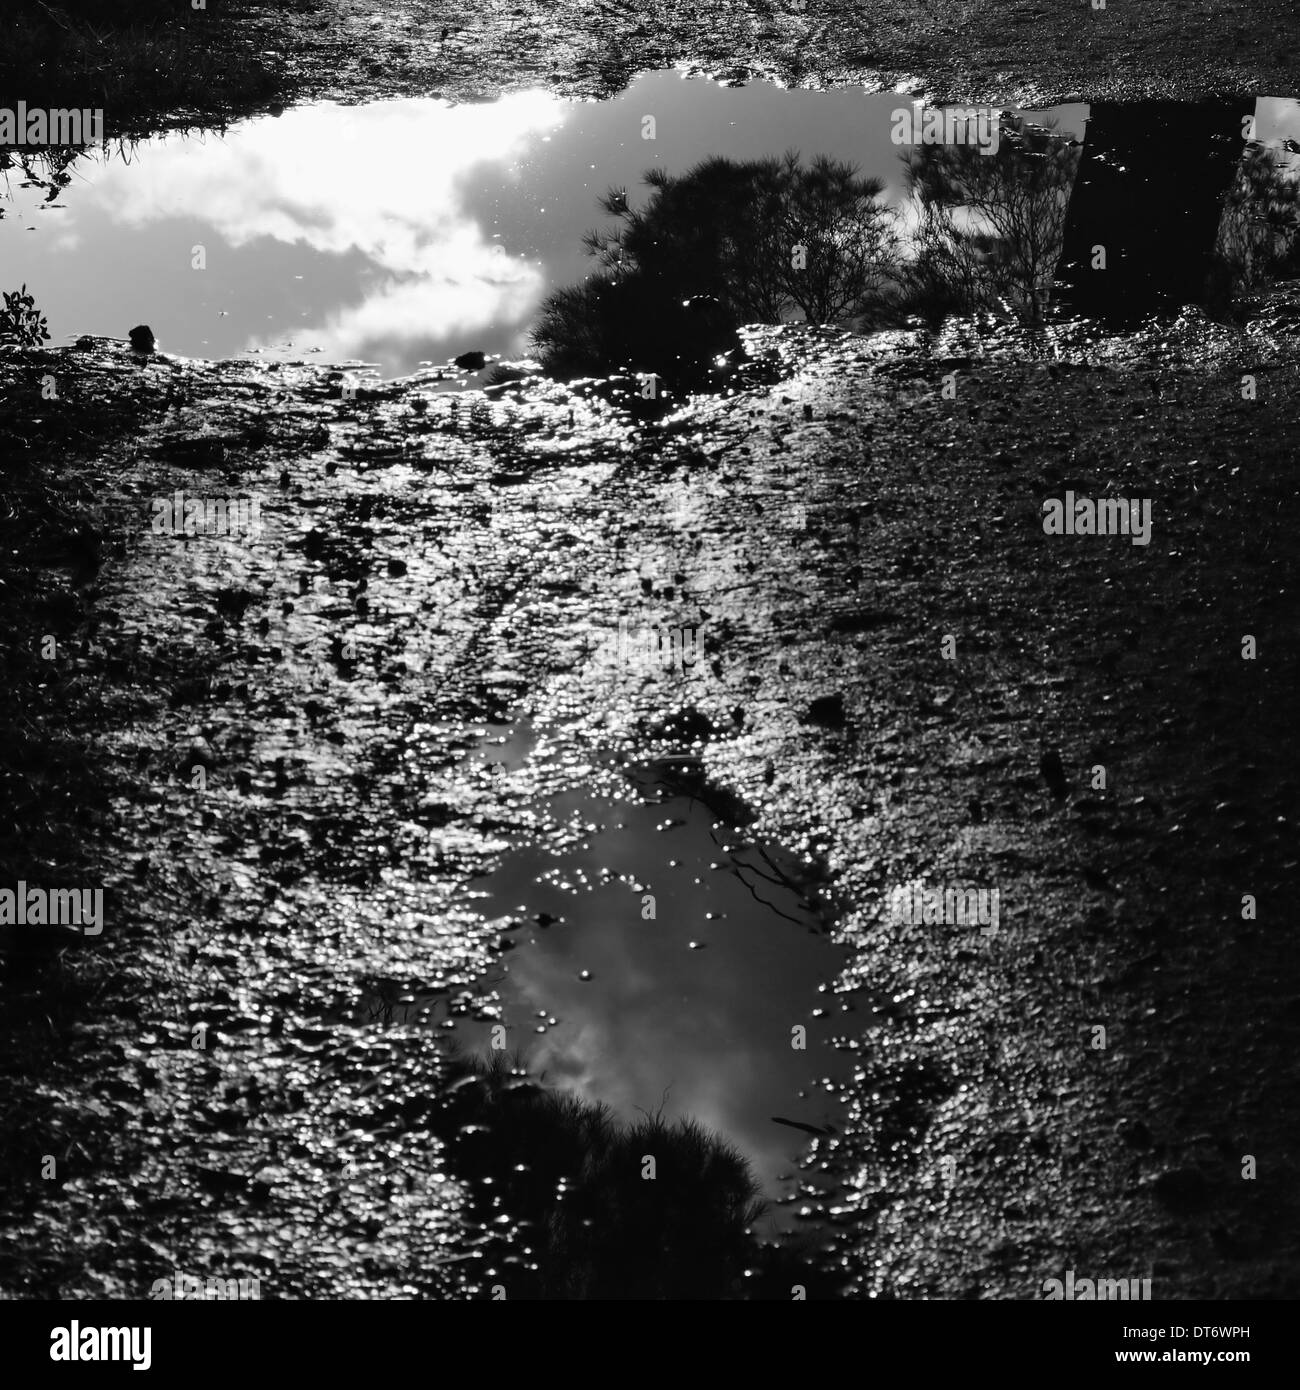 Puddles of water with tree reflections sunlight on muddy ground after the rain. Black and white. Stock Photo